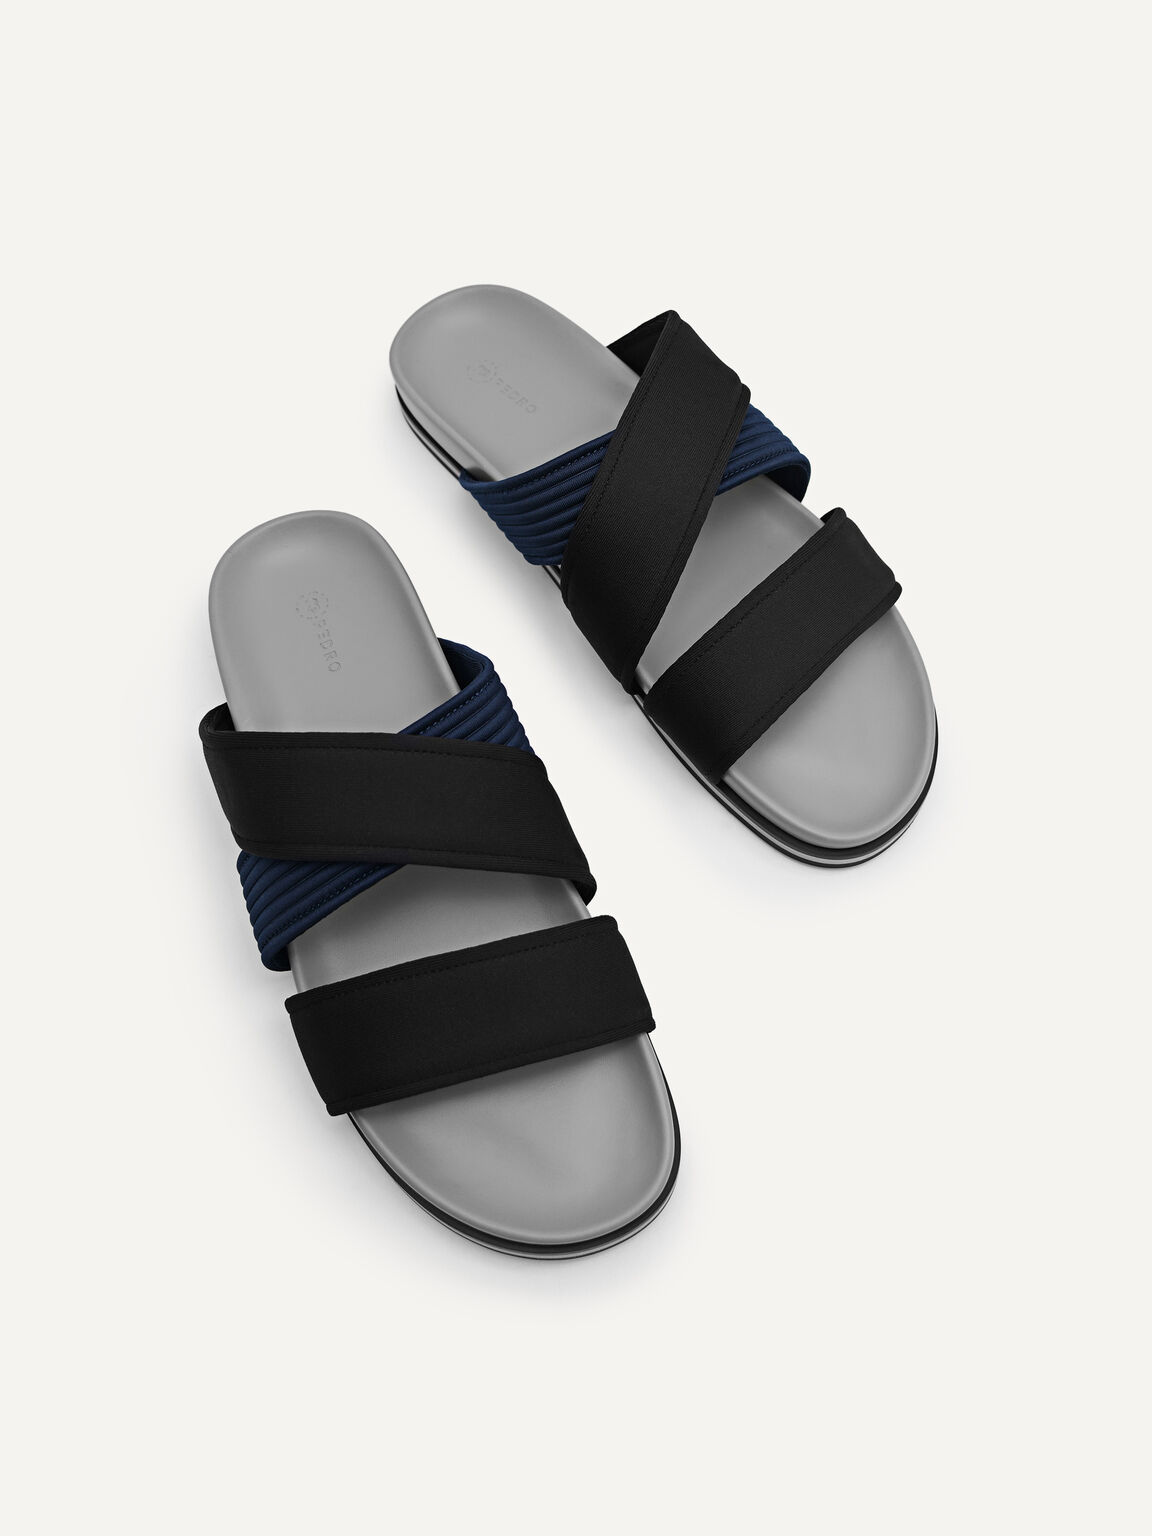 rePEDRO Pleated Sandals, Navy, hi-res